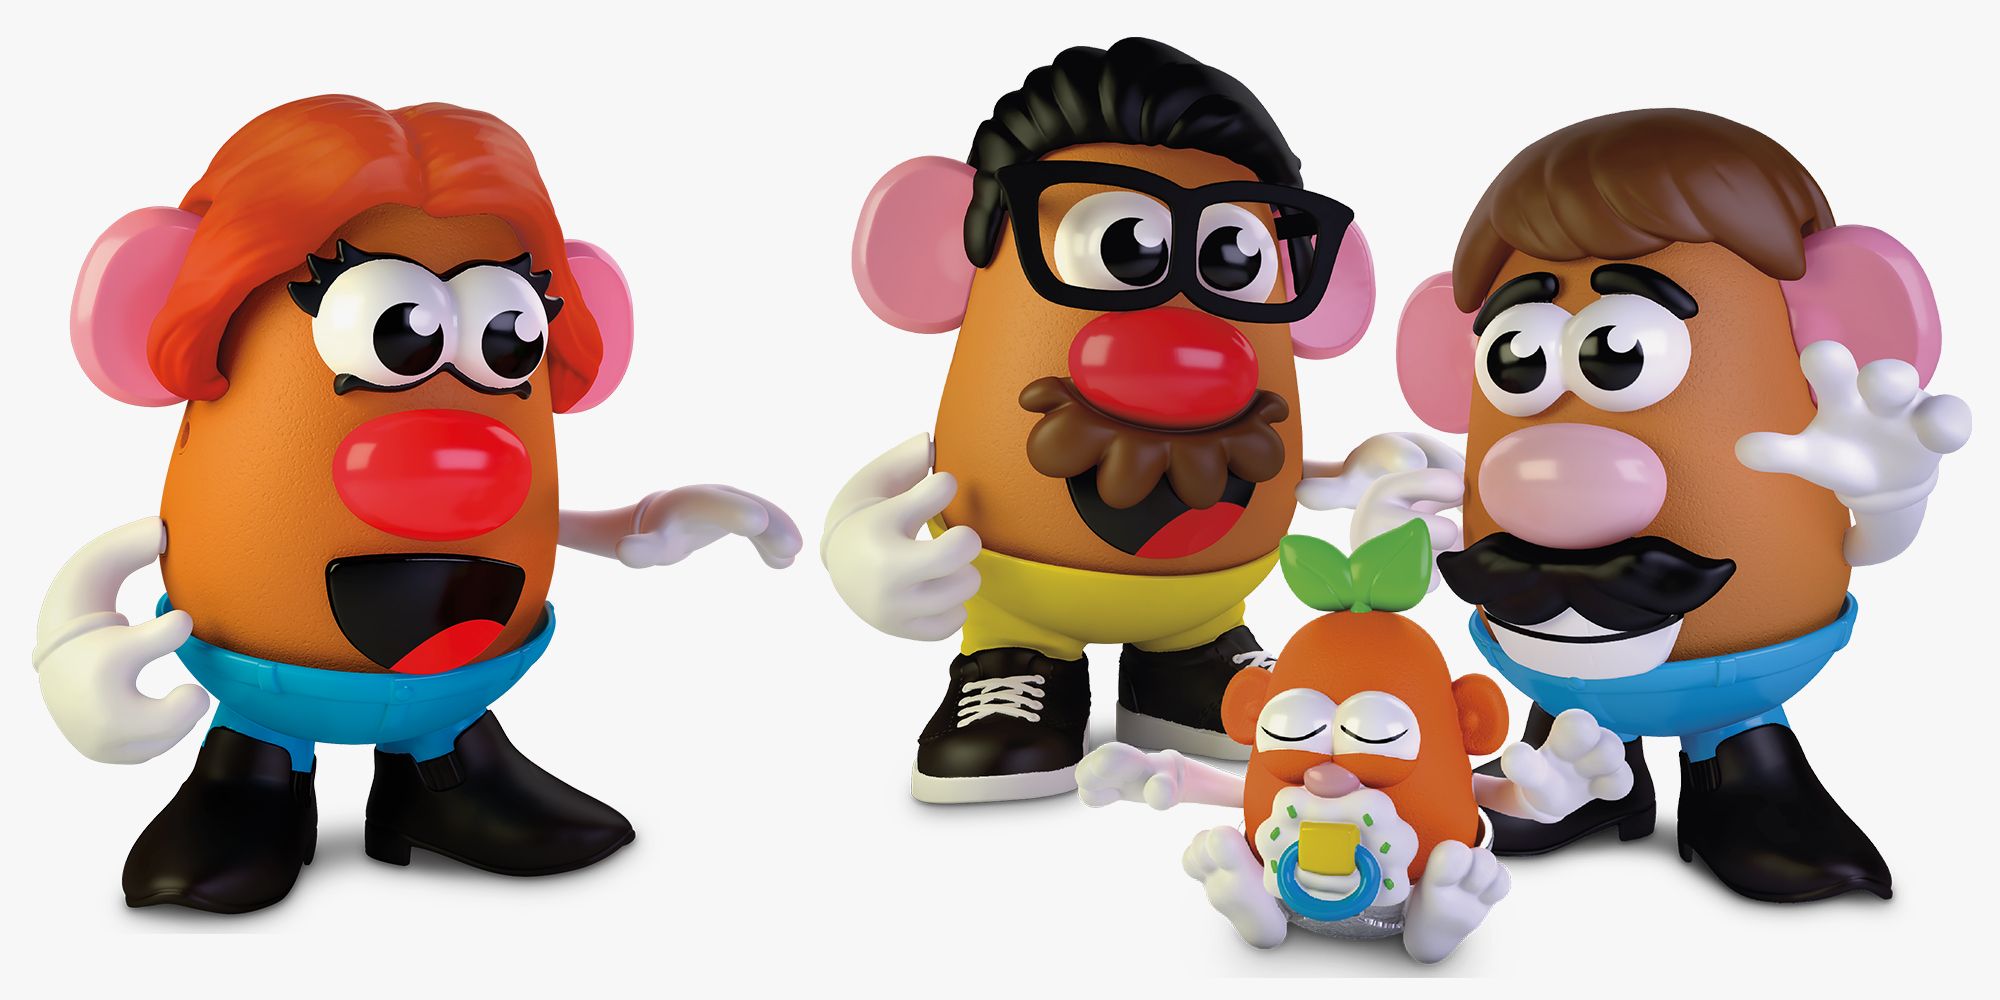 Details about   HASBRO MR AND MRS POTATO HEAD NEW In Boxes CHILDS KIDS TOY 